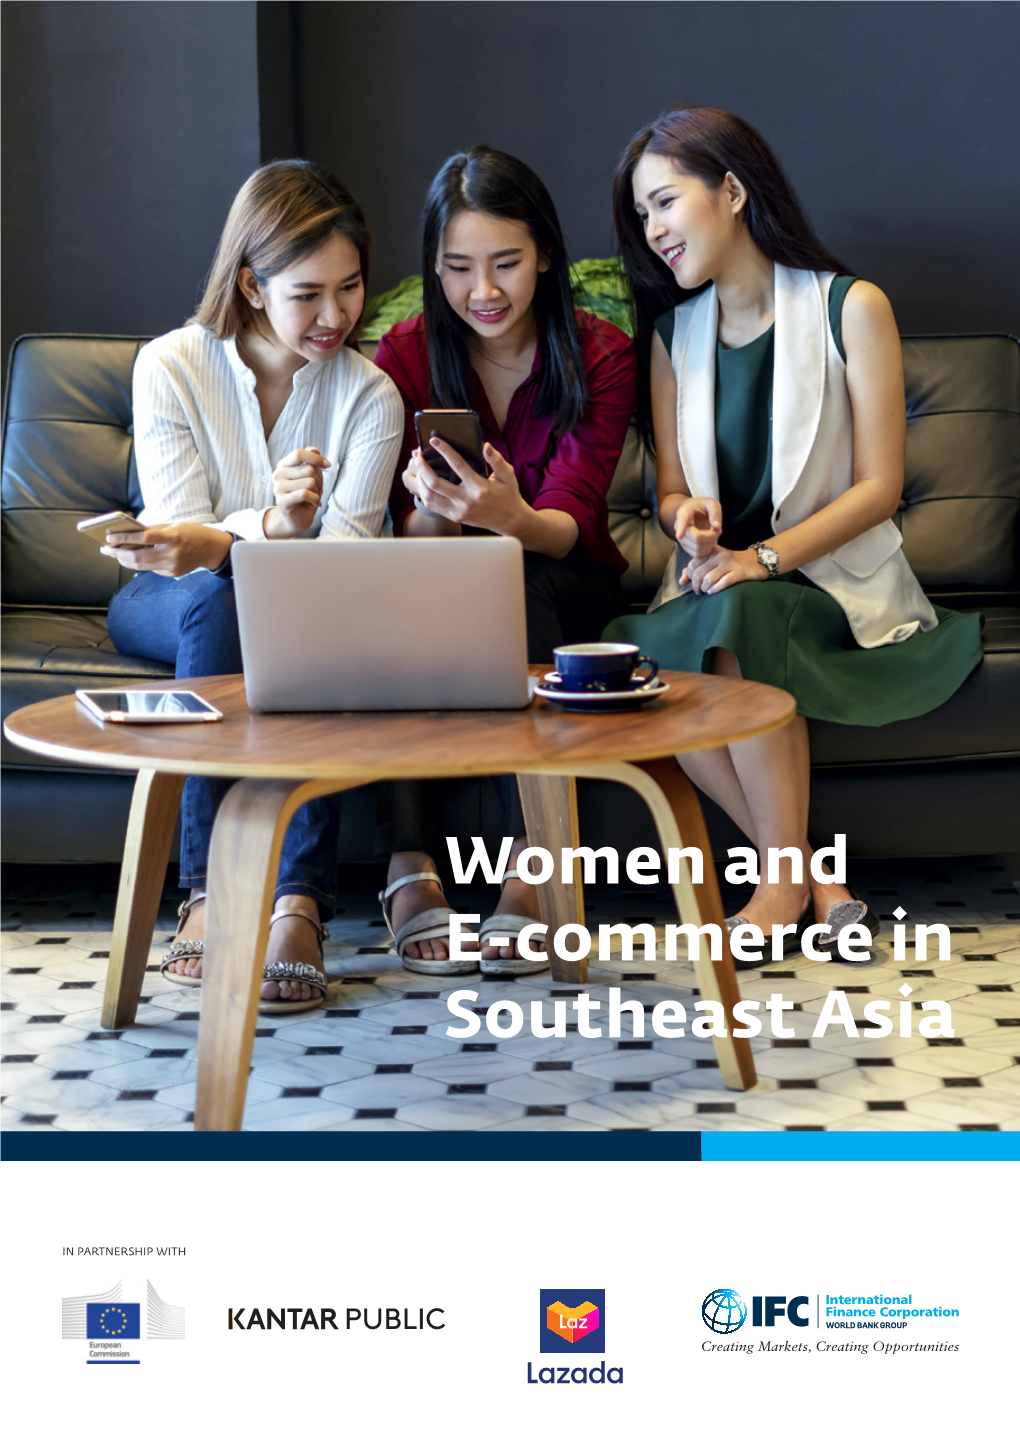 Women and E-Commerce in Southeast Asia